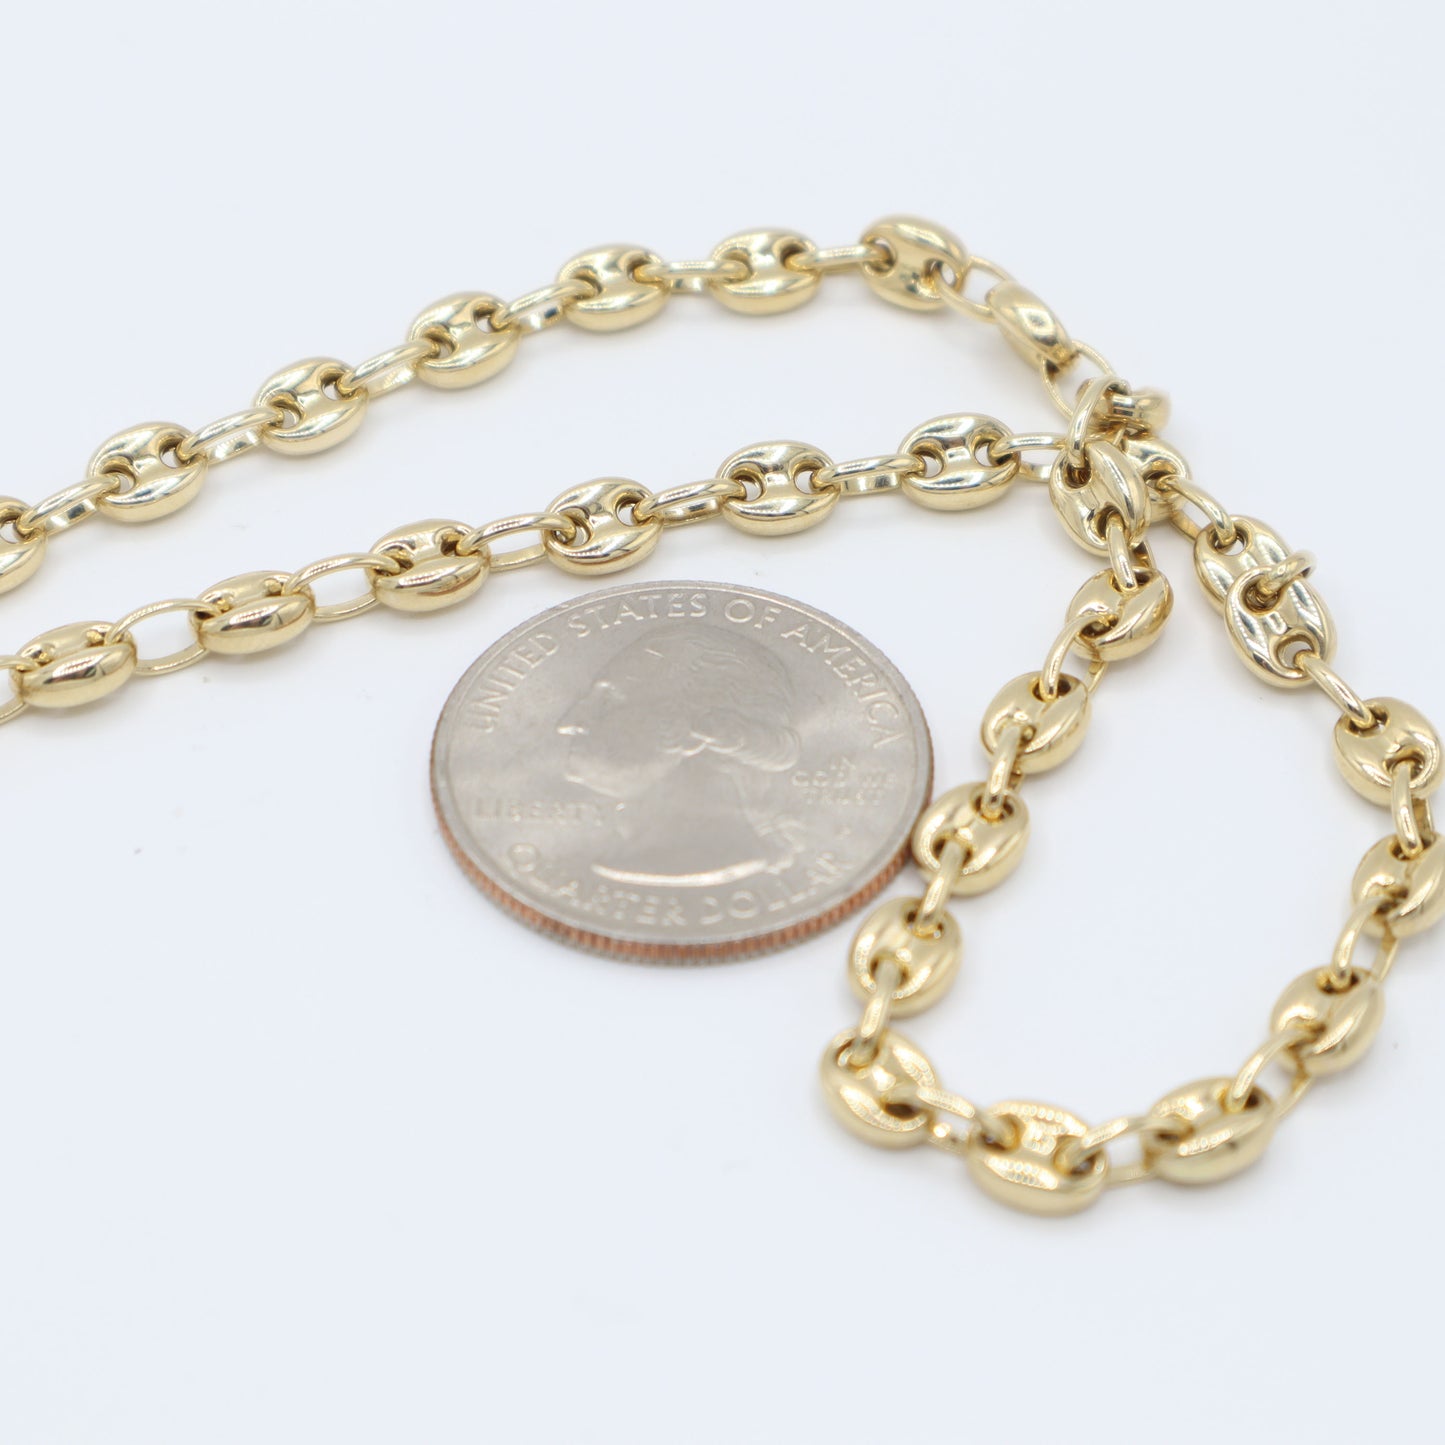 Yellow Gold Anchor Chain 22"